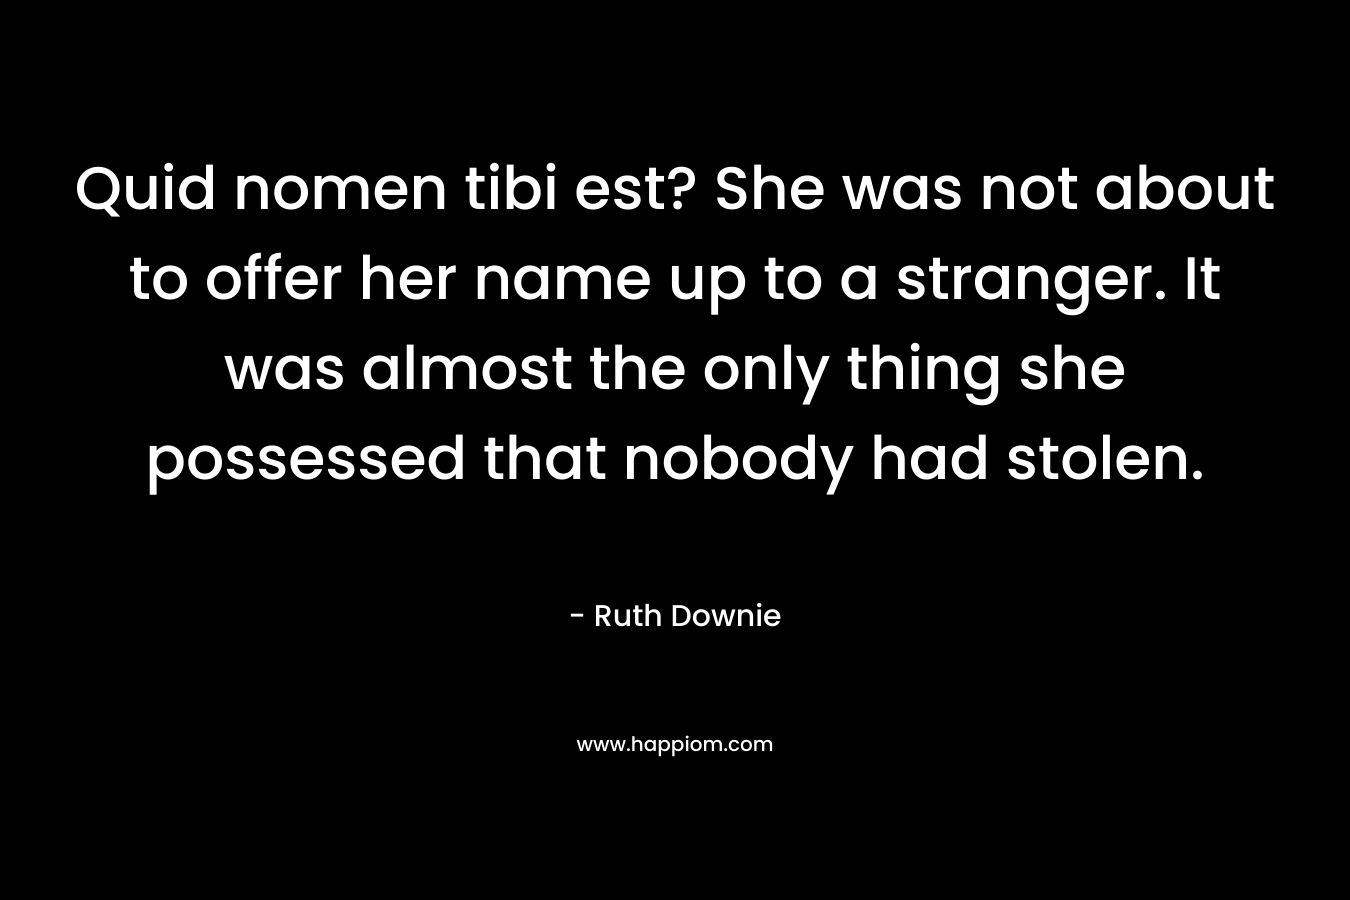 Quid nomen tibi est? She was not about to offer her name up to a stranger. It was almost the only thing she possessed that nobody had stolen.